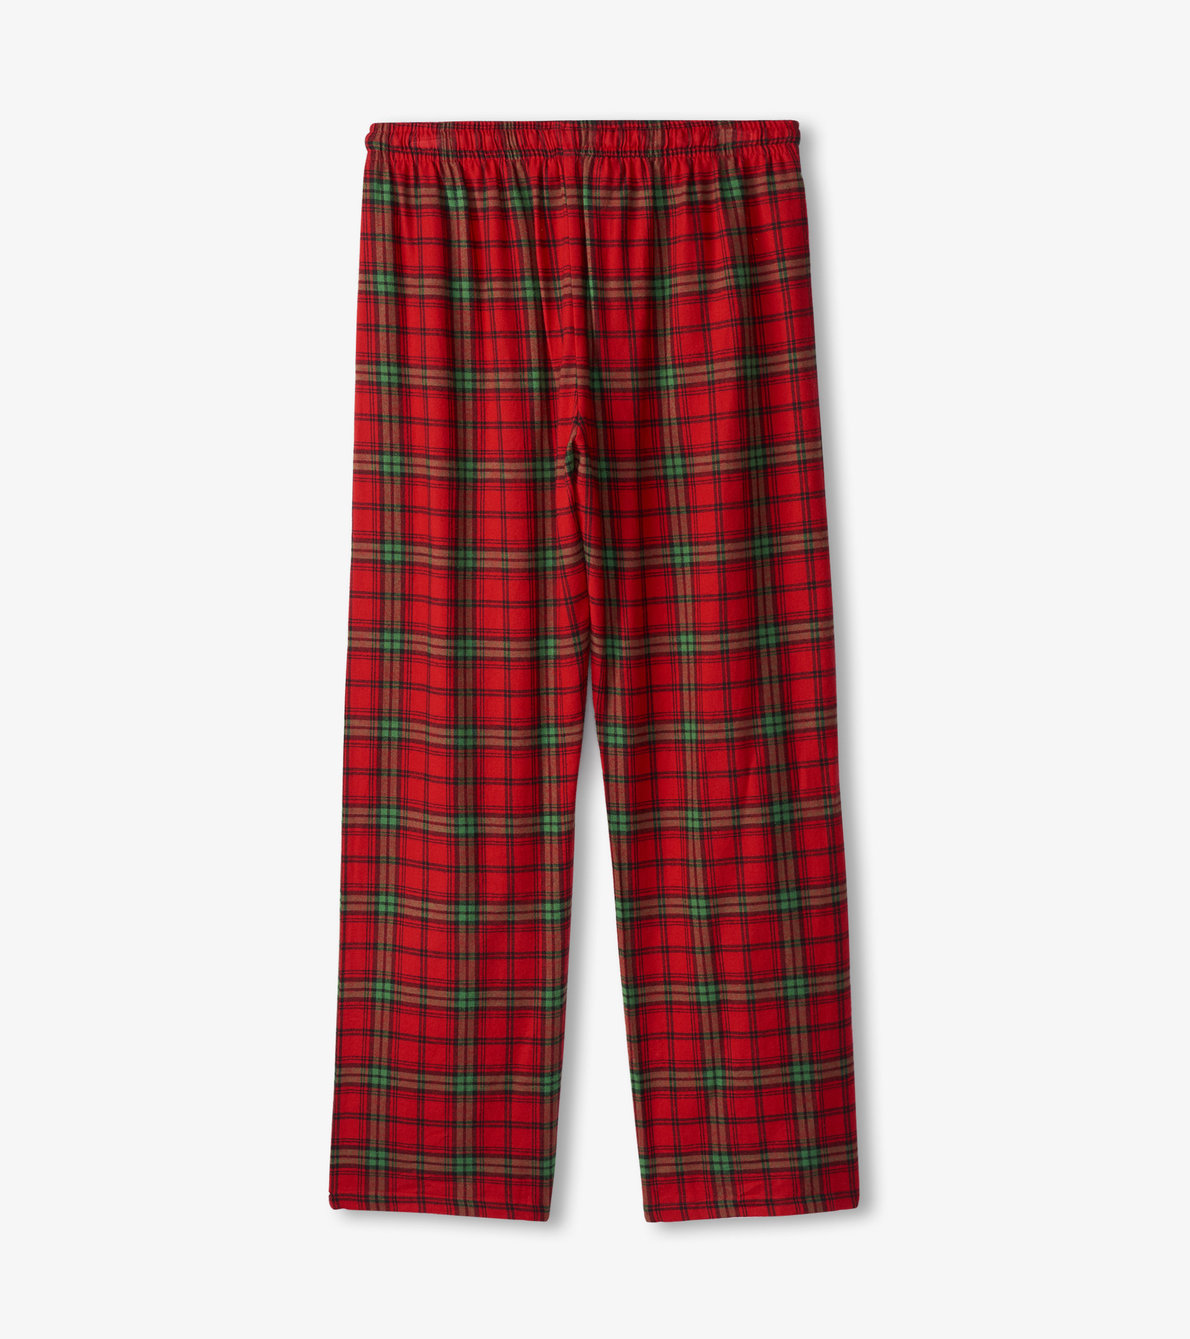 View larger image of Men's Classic Holiday Plaid Flannel Pajama Pants